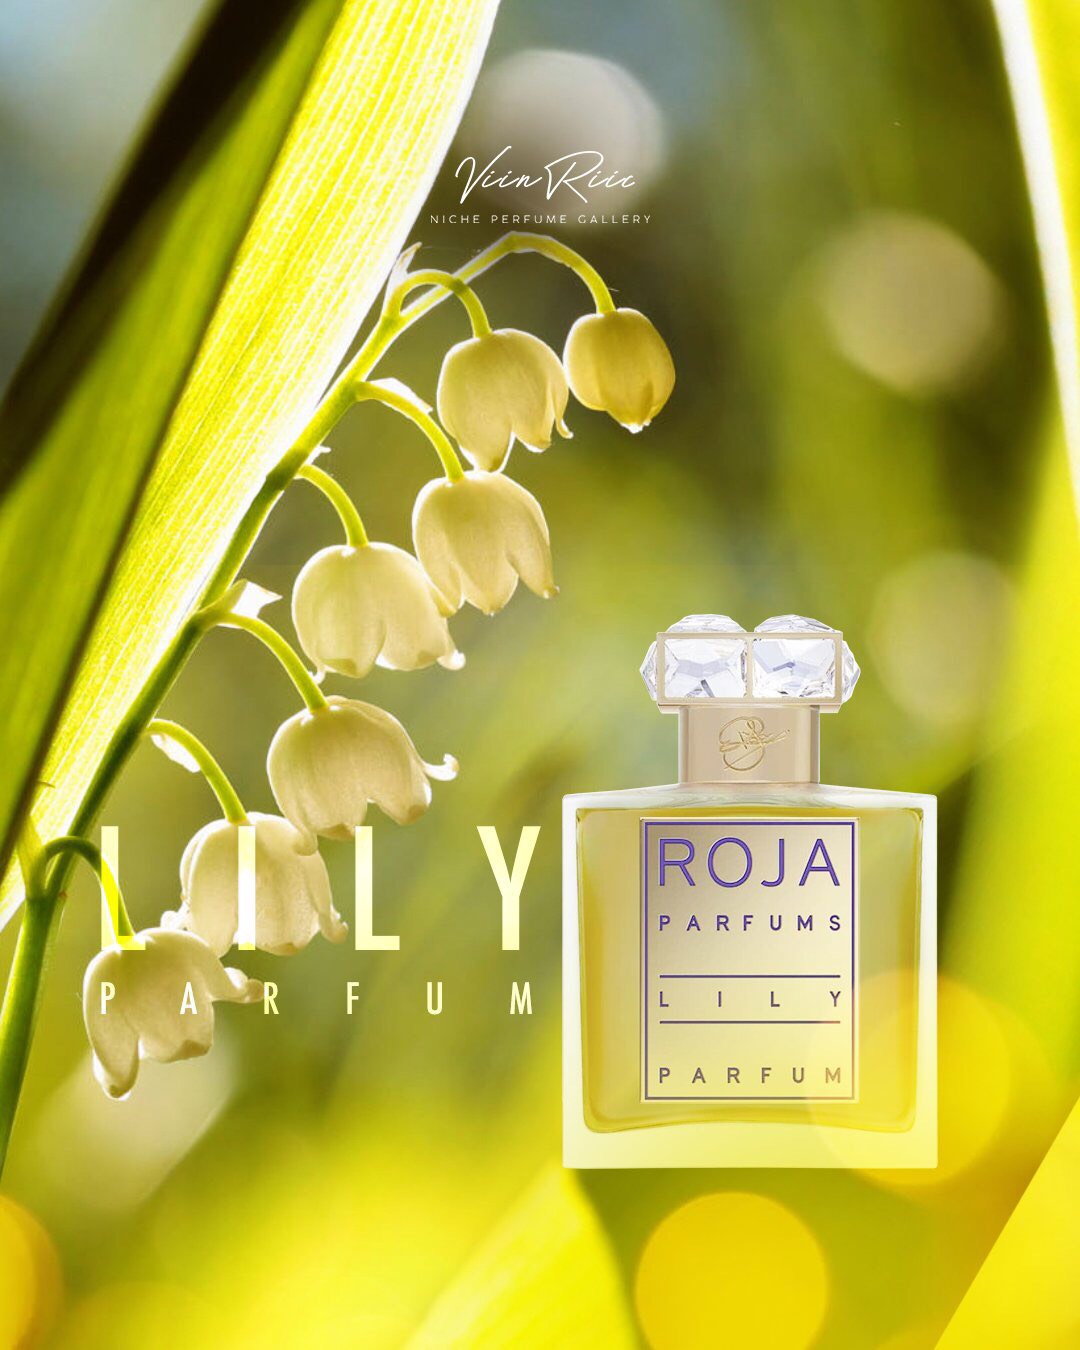 Lily ROJA Parfums crystallizes from flowers that possess the scent of luck